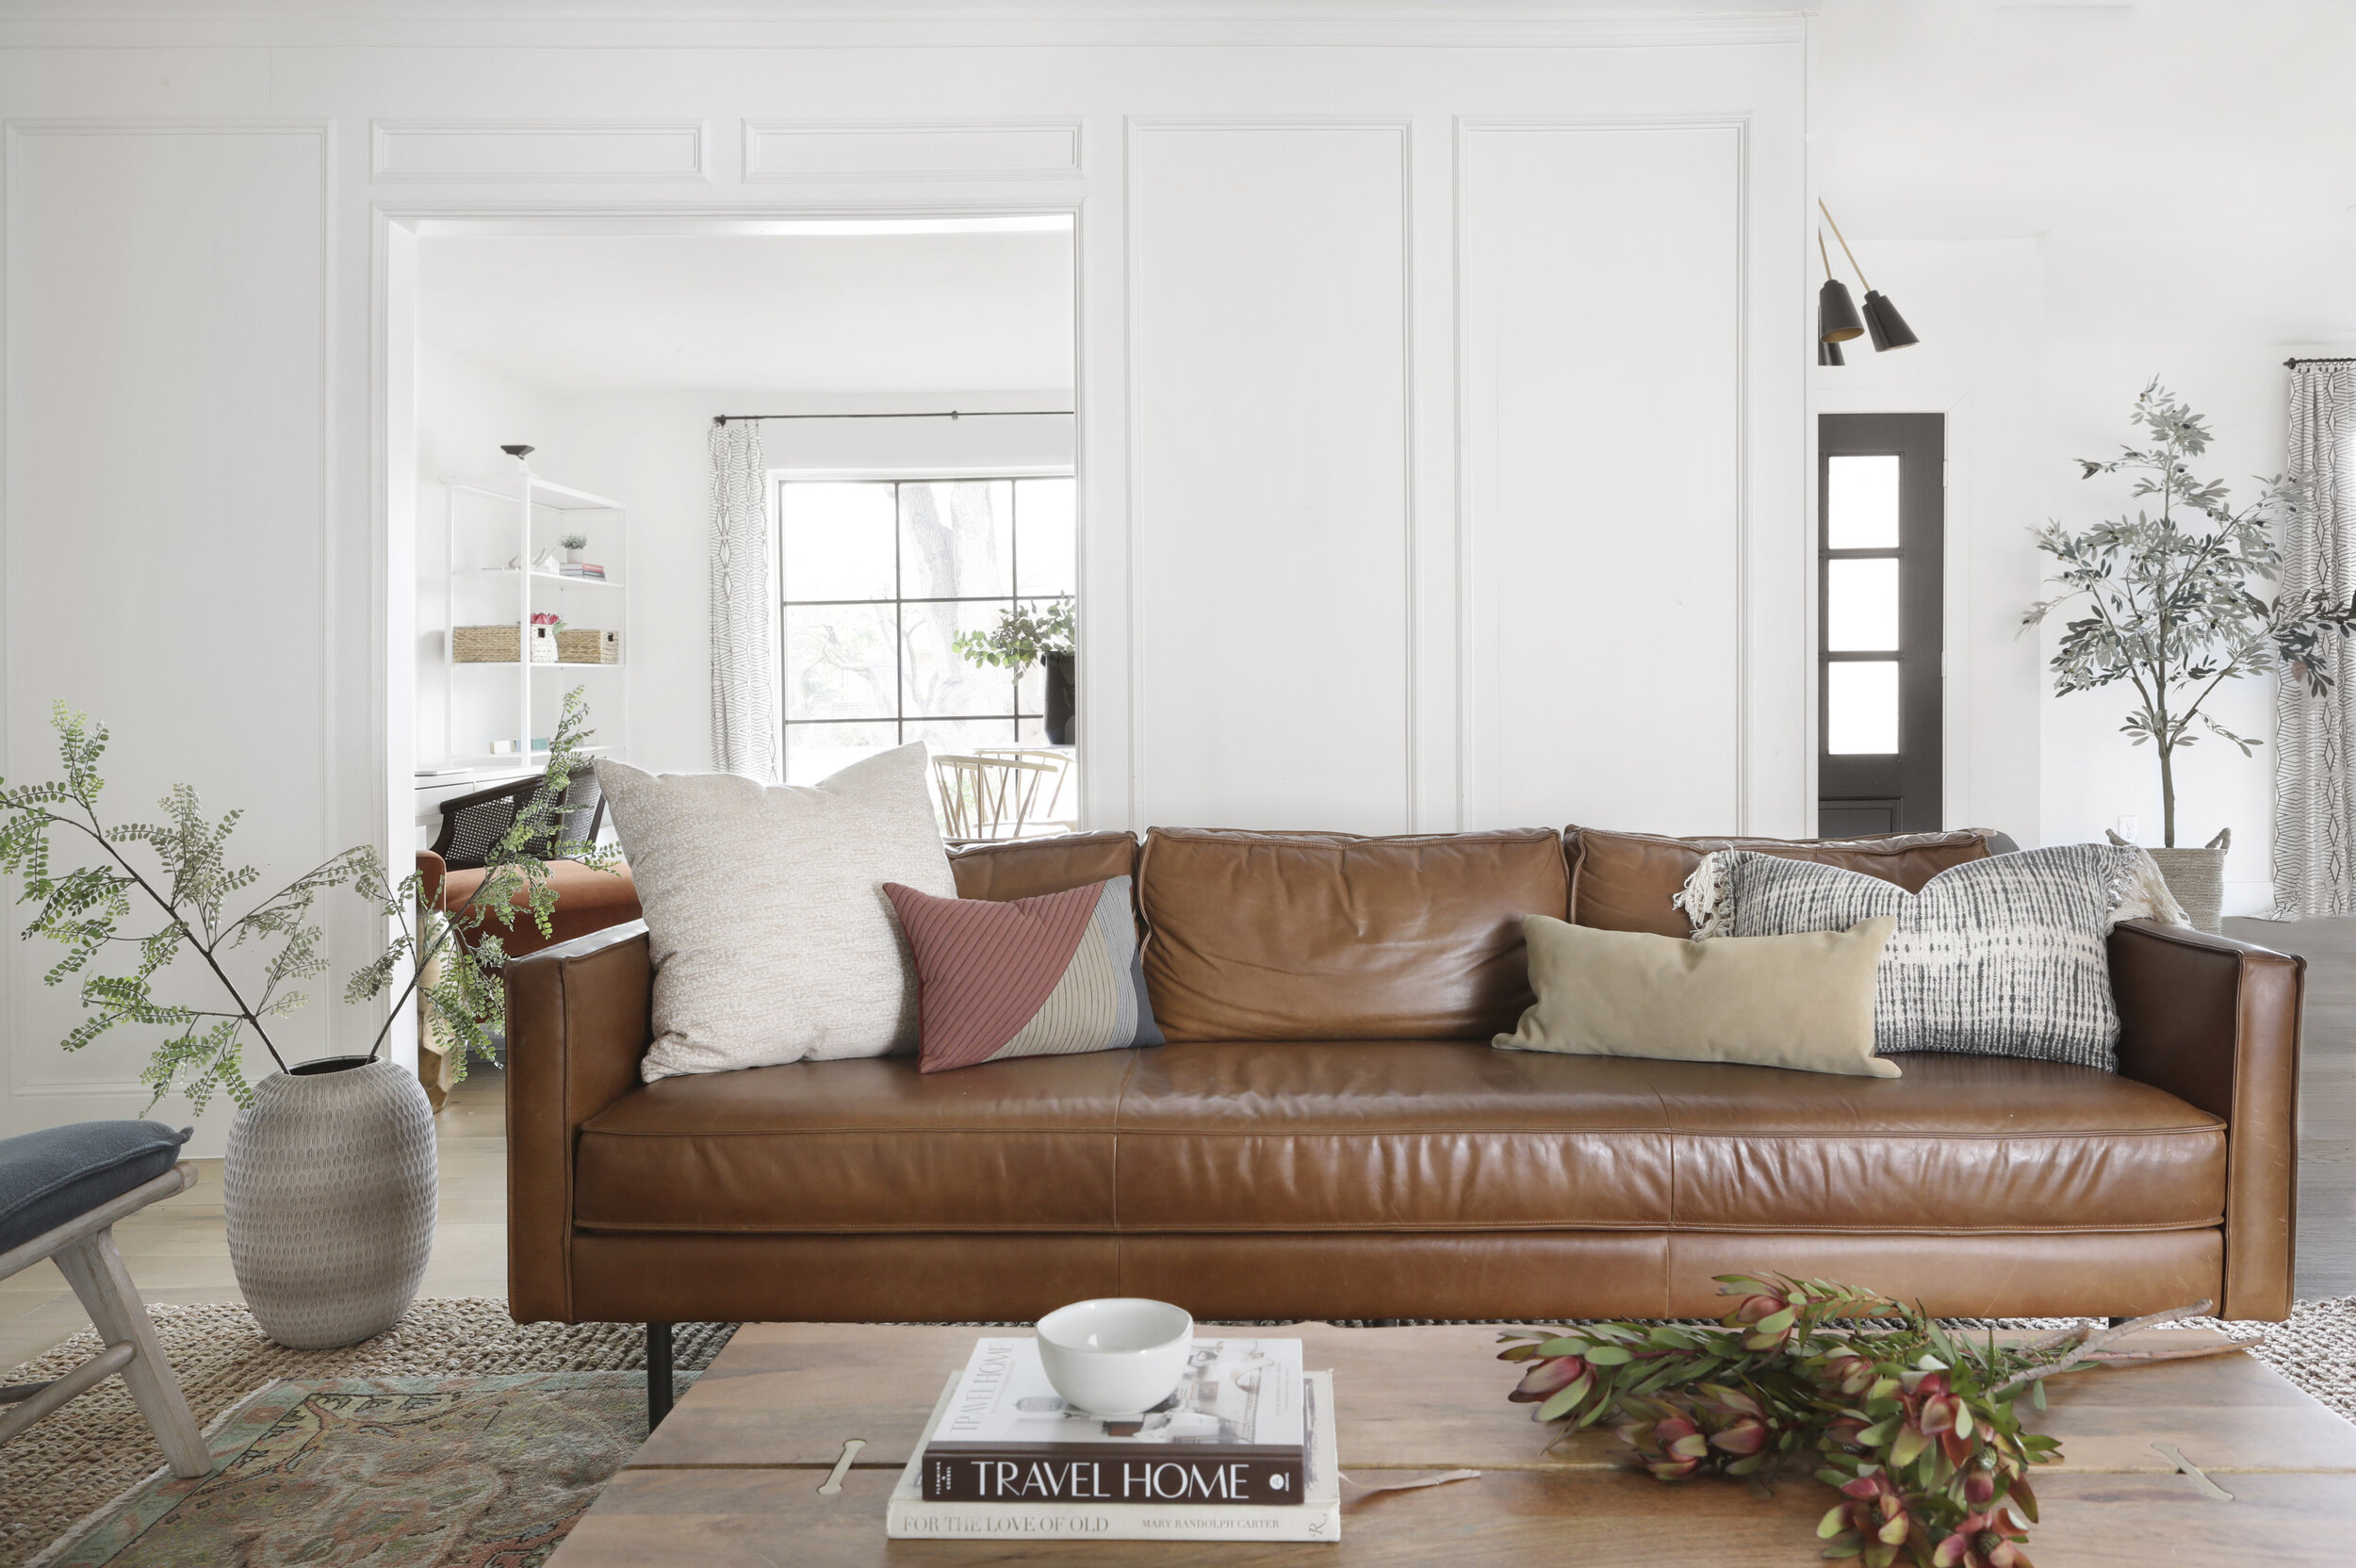 Leather Sofa // White Pillow // Colorblock Pillow // Suede Lumbar // Fringed Pillow (similar) // Coffee Table